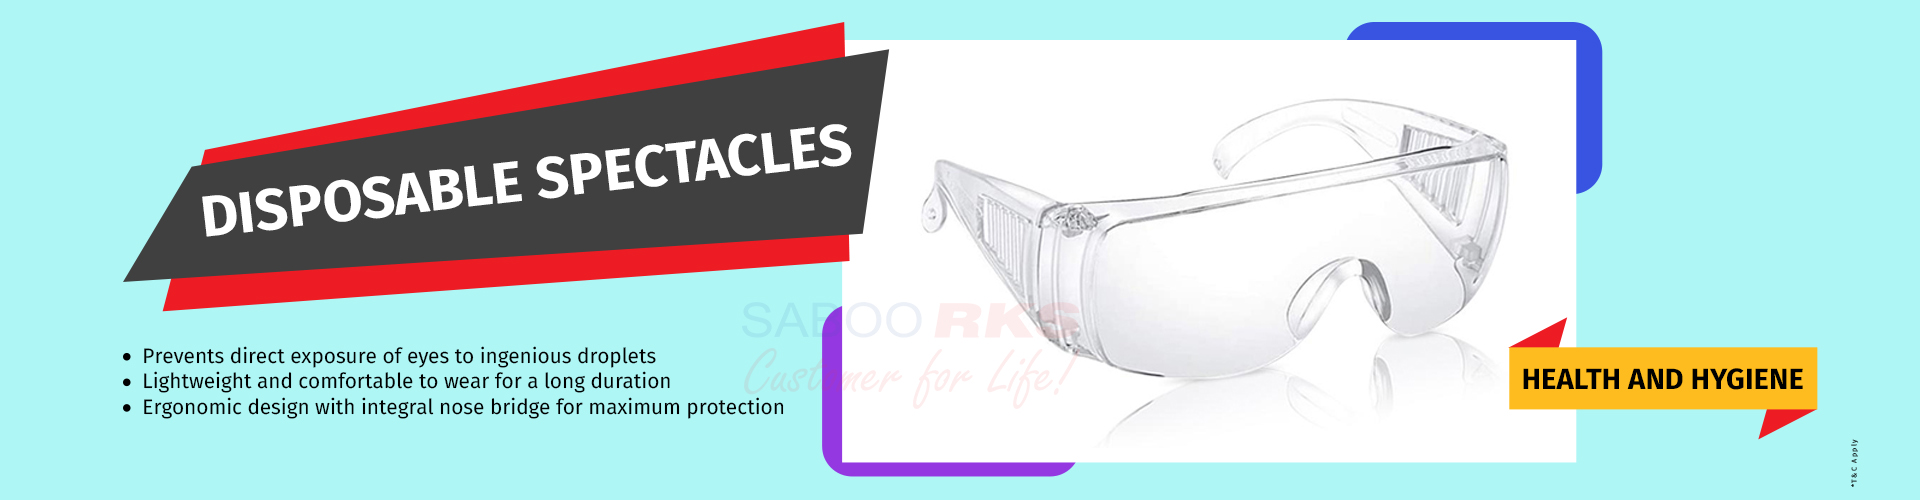 Disposable-Spectacles